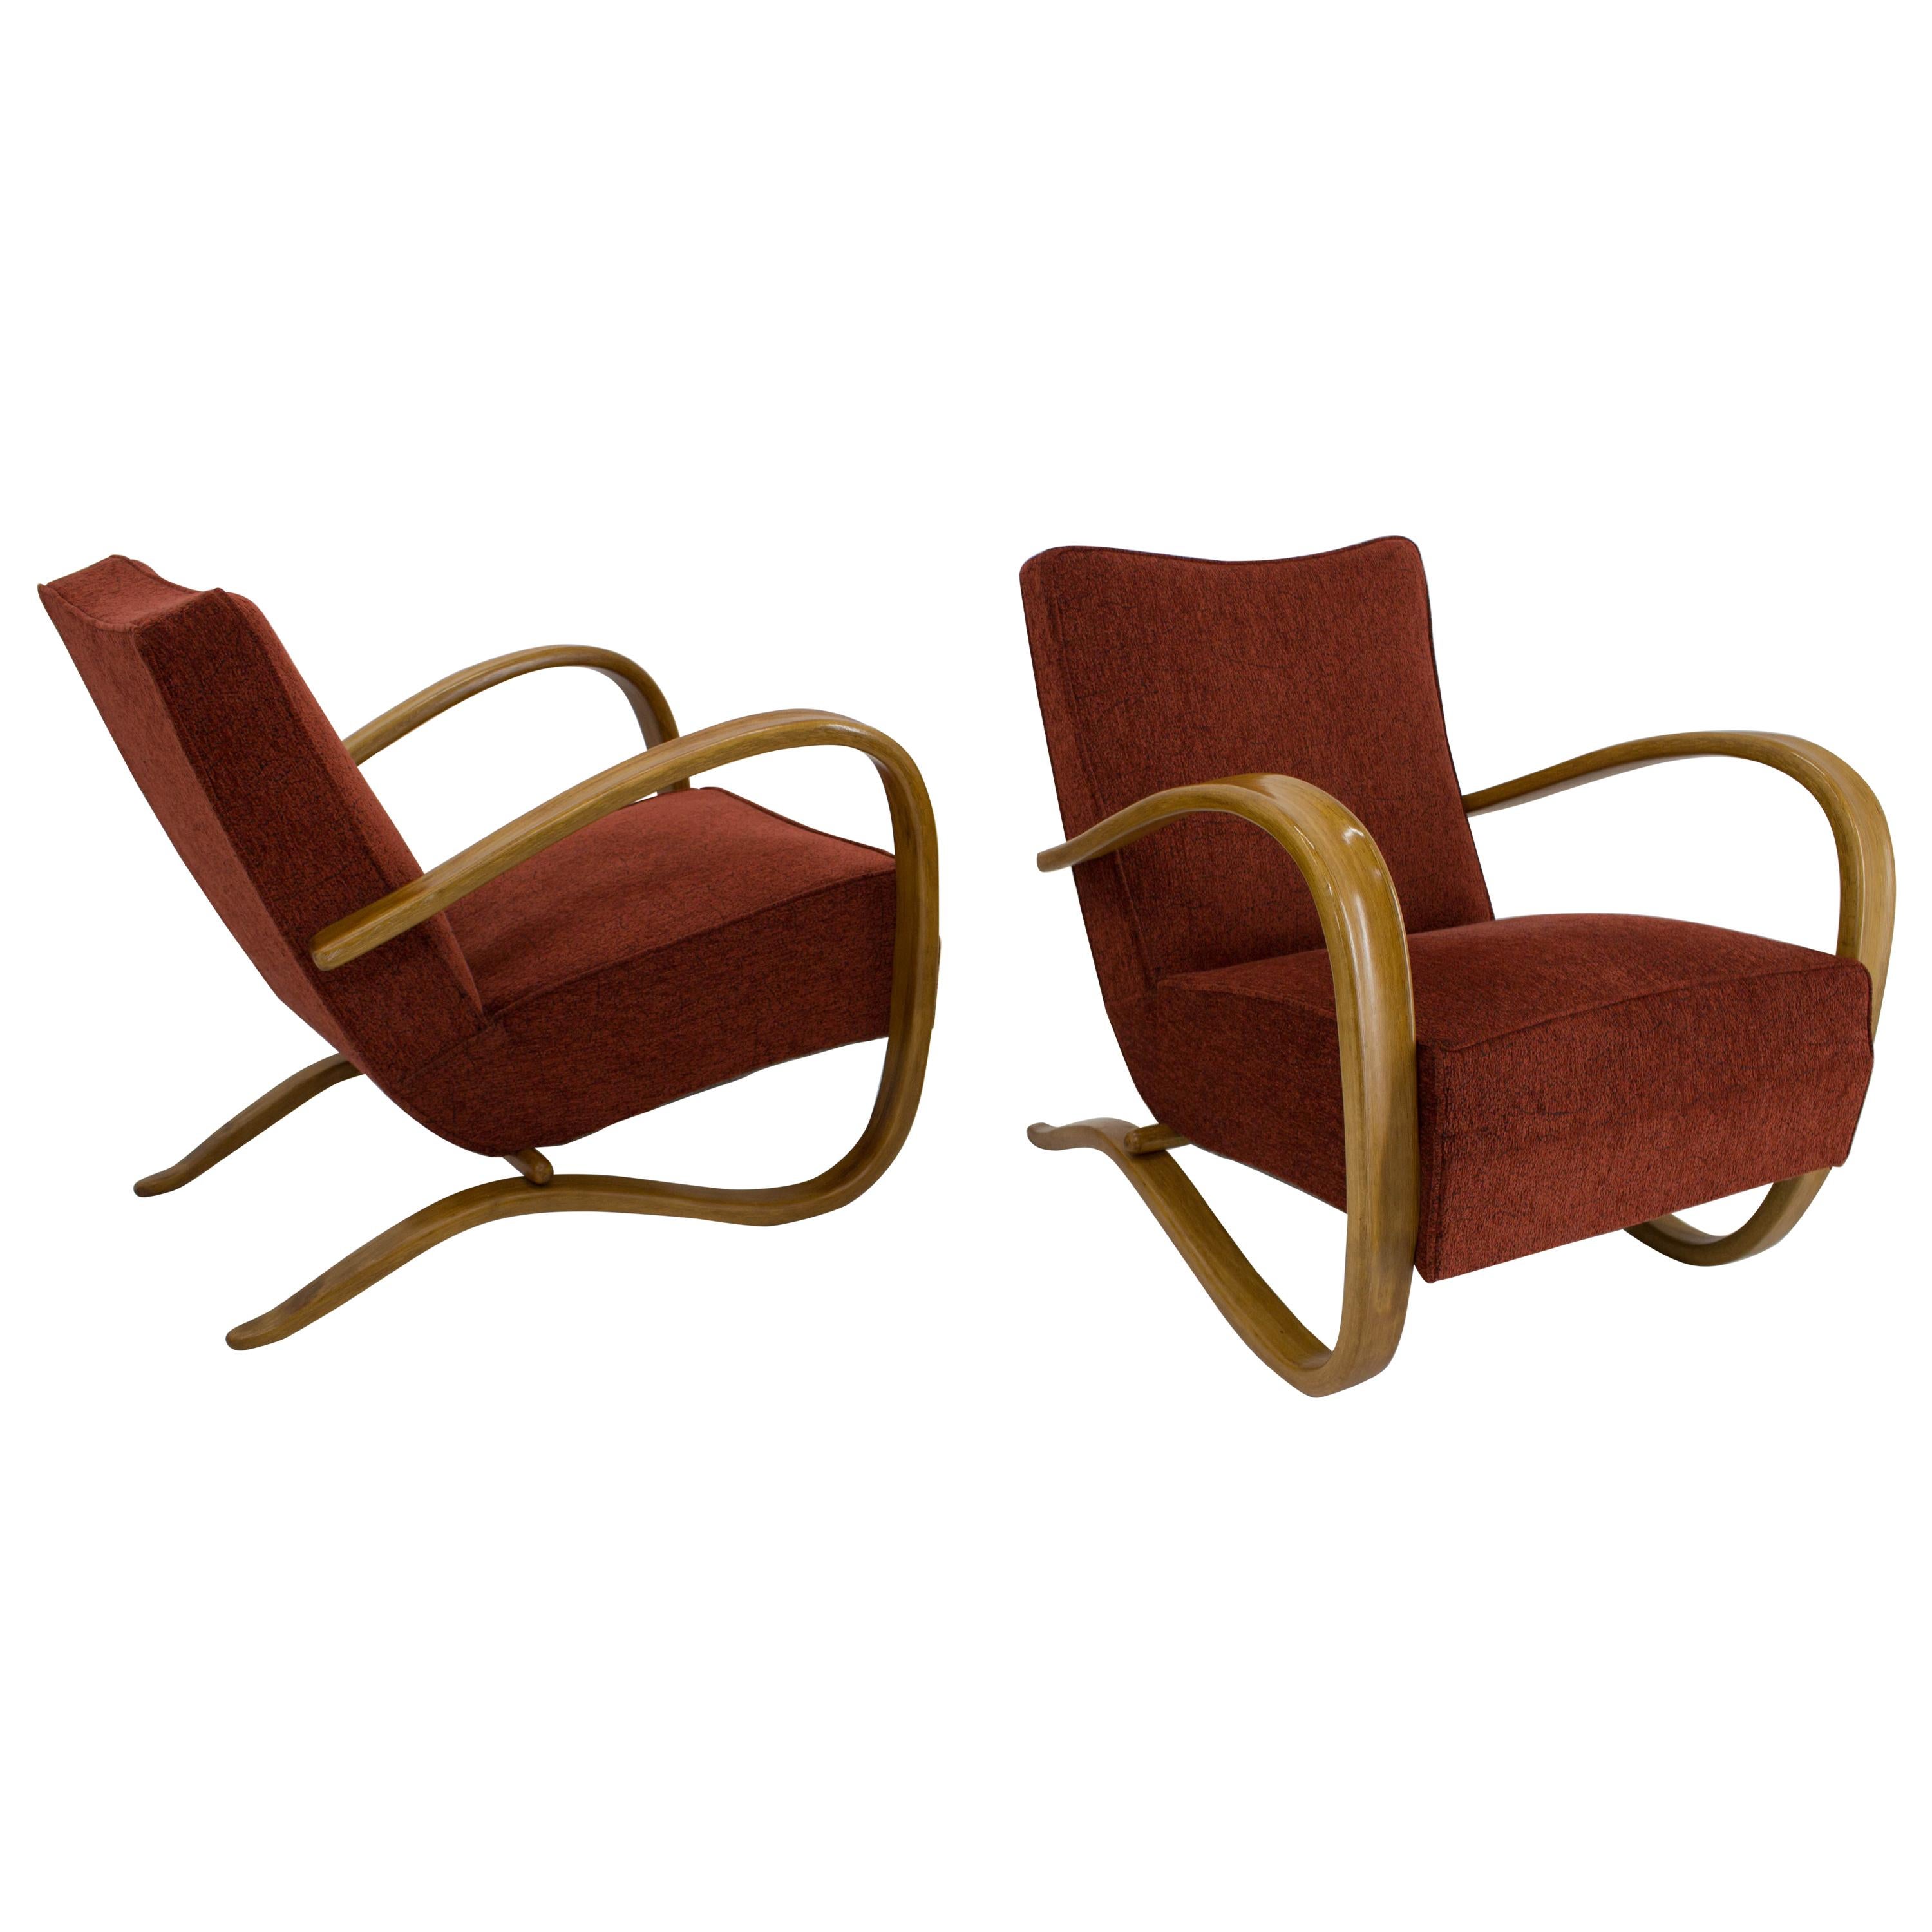 Set of Two Armchairs H269 by Jindrich Halabala, 1940s